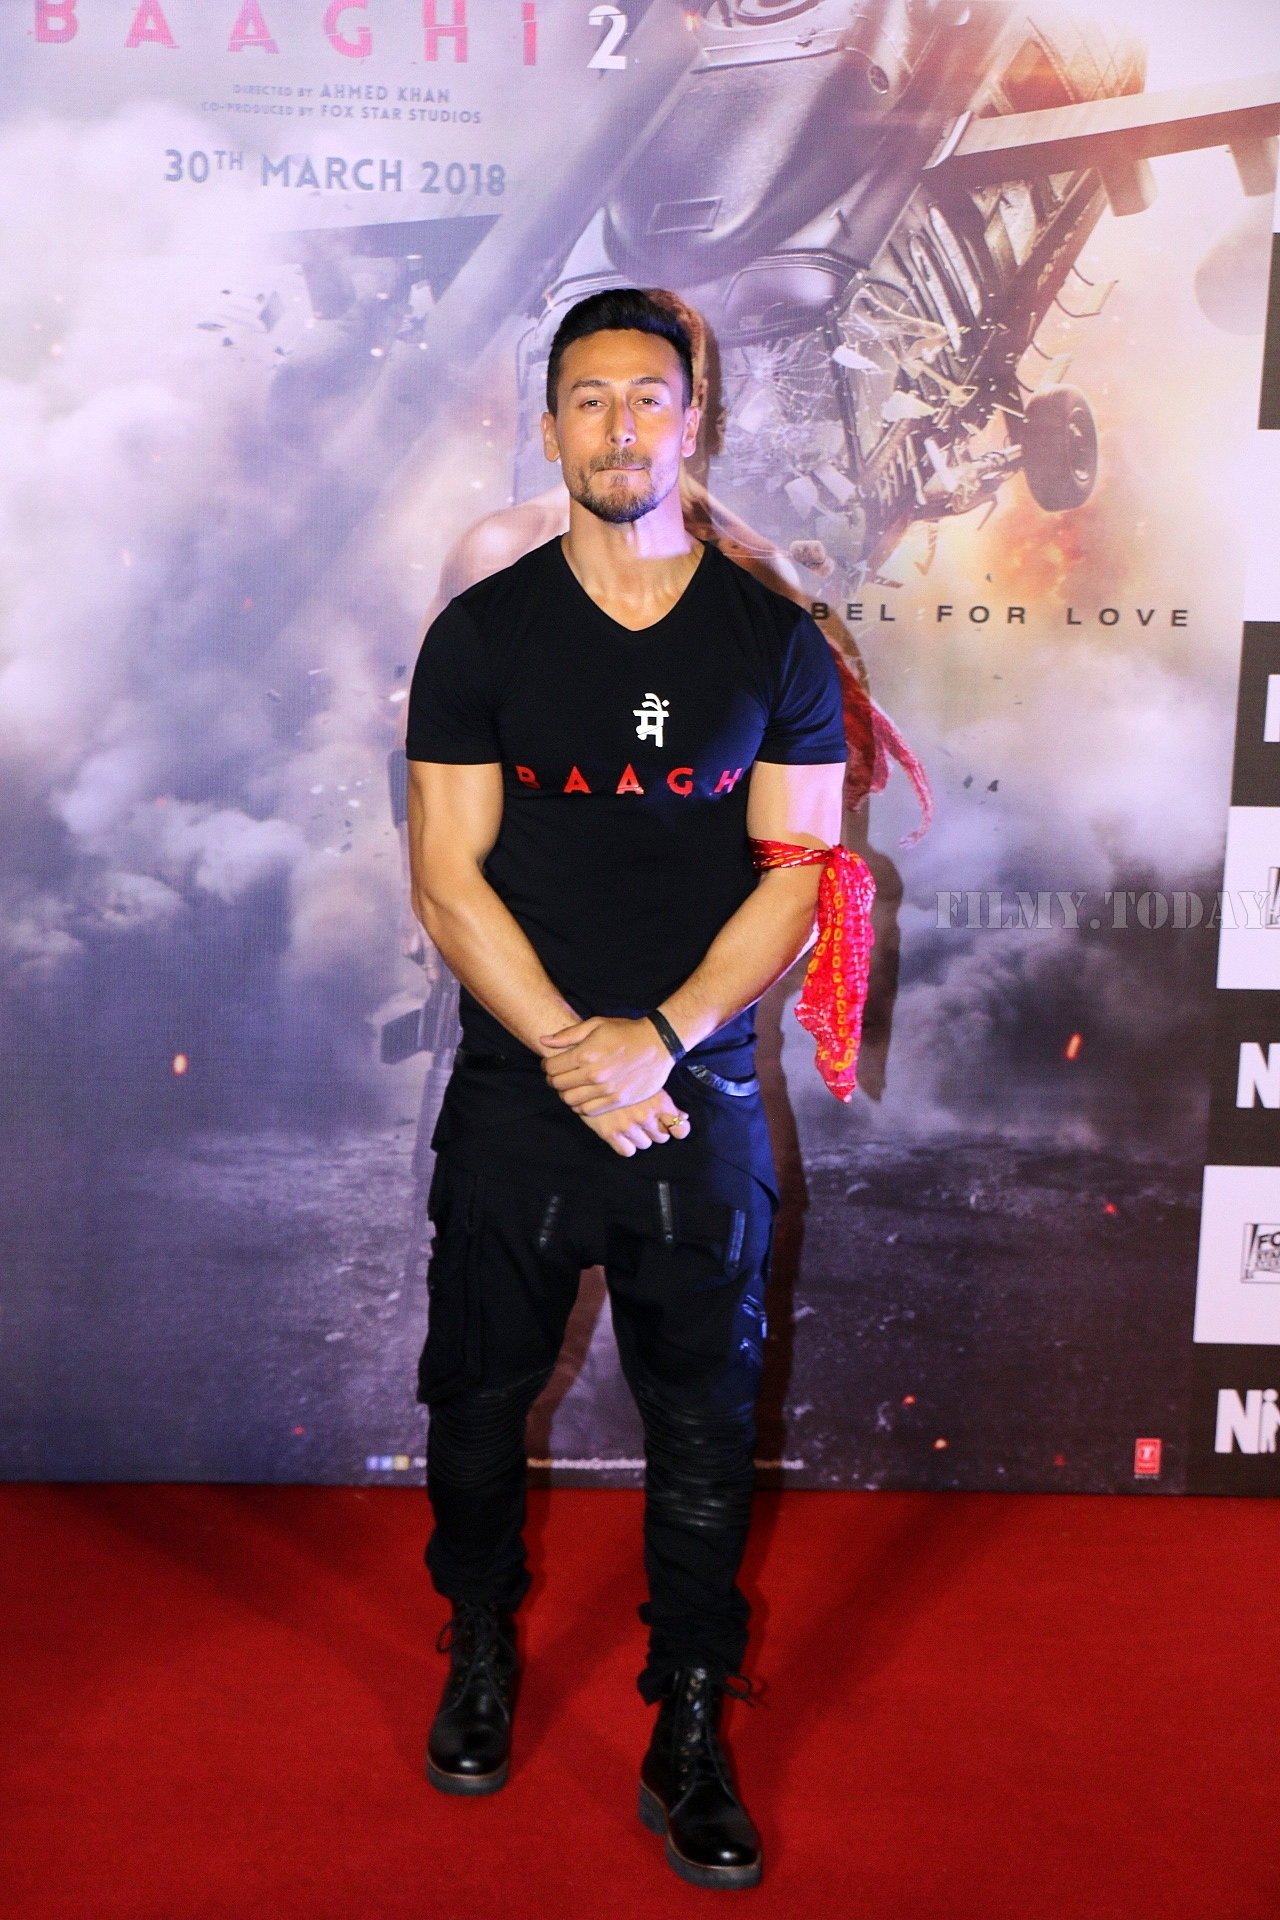 Tiger Shroff - Photos: Trailer Launch Of Film Baaghi 2 With Tiger Shroff & Disha Patani | Picture 1568162